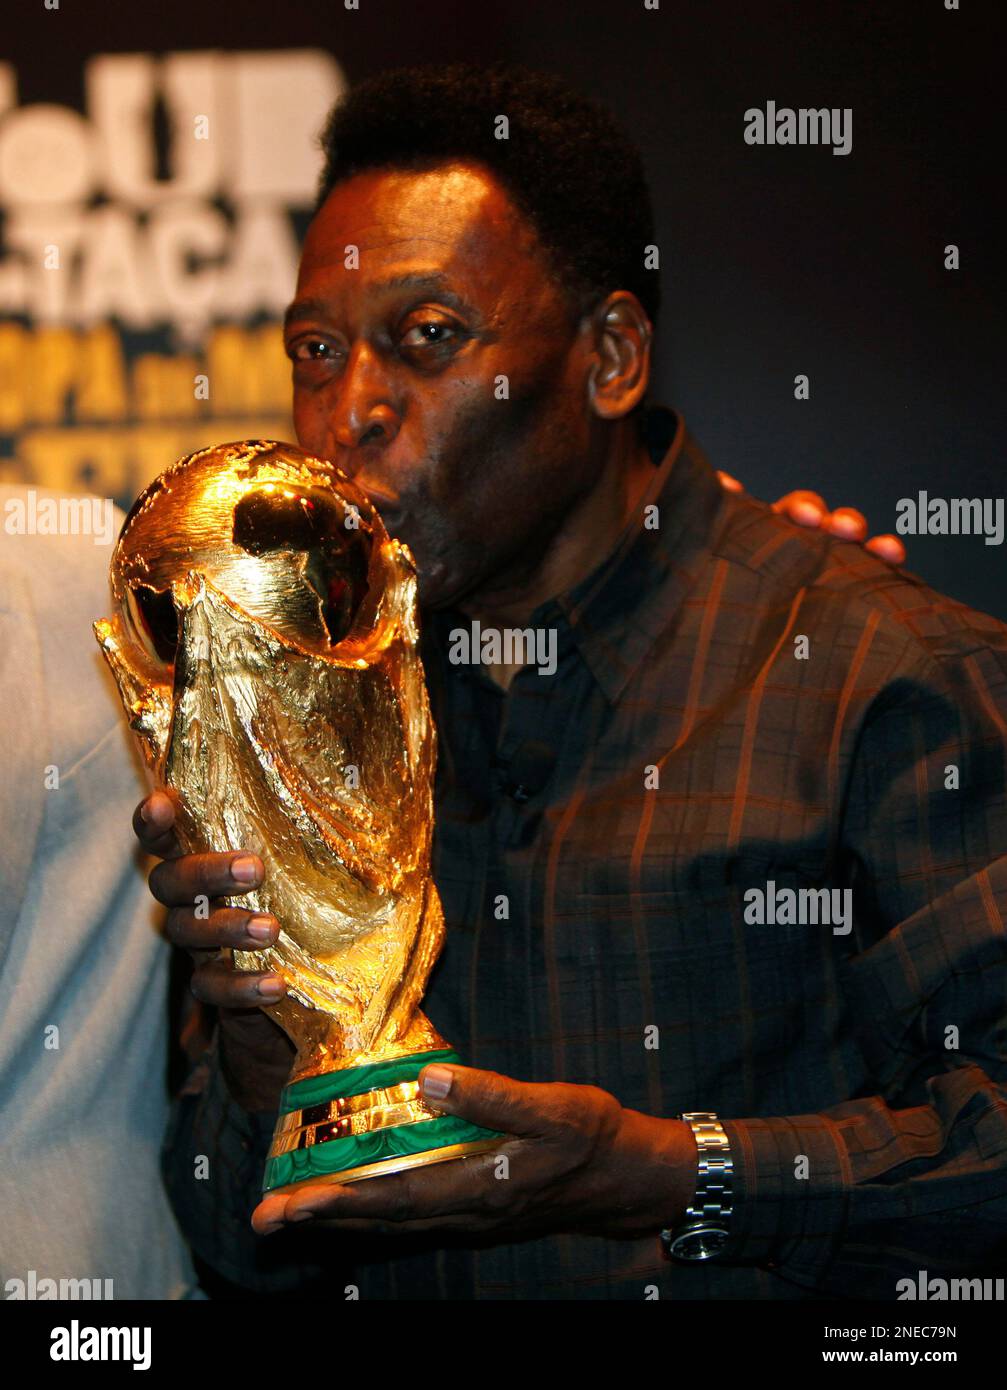 Former star soccer player Pele kisses the FIFA World Cup trophy in Rio de  Janeiro, Saturday, Feb. 6, 2010. The trophy is in Rio de Janeiro as part of  its nine-month world